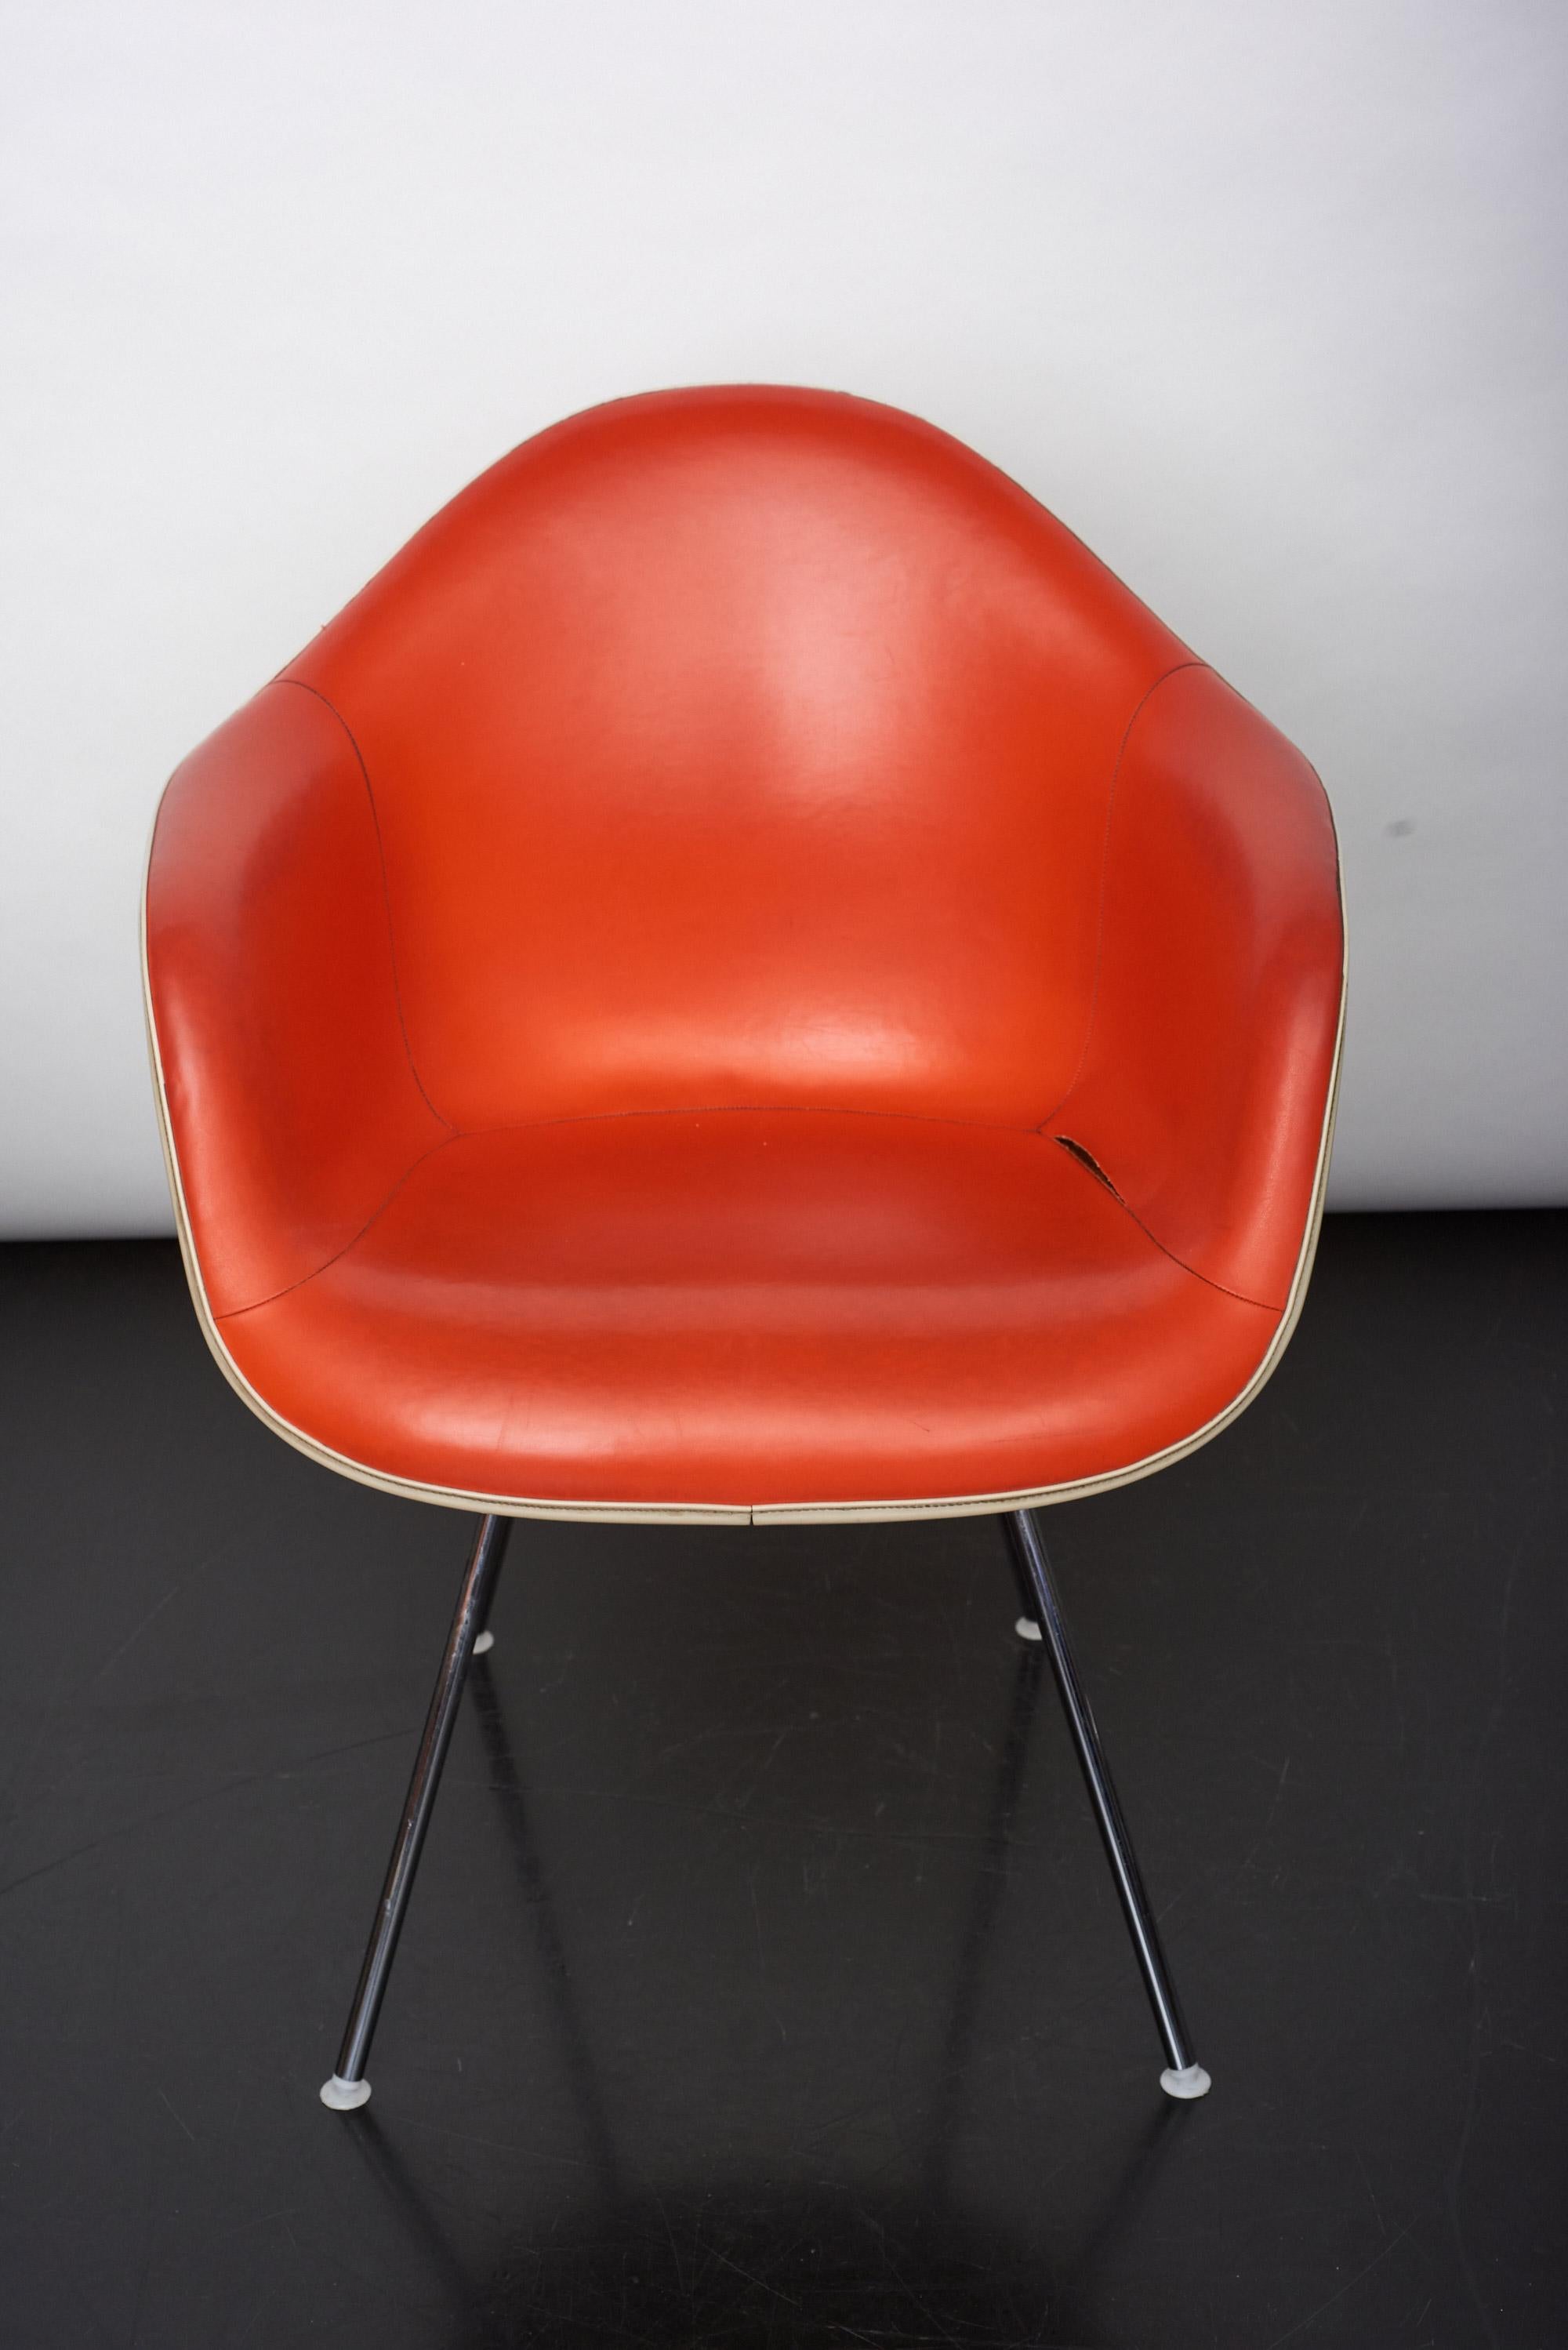 The fully upholstered DAX chair is part of the Eames plastic armchairs collection, first presented as part of a New York Moma competition. An iconic piece of design in a very rare version. Moulded fiberglass, beige shell. Leather upholstery. Screwed